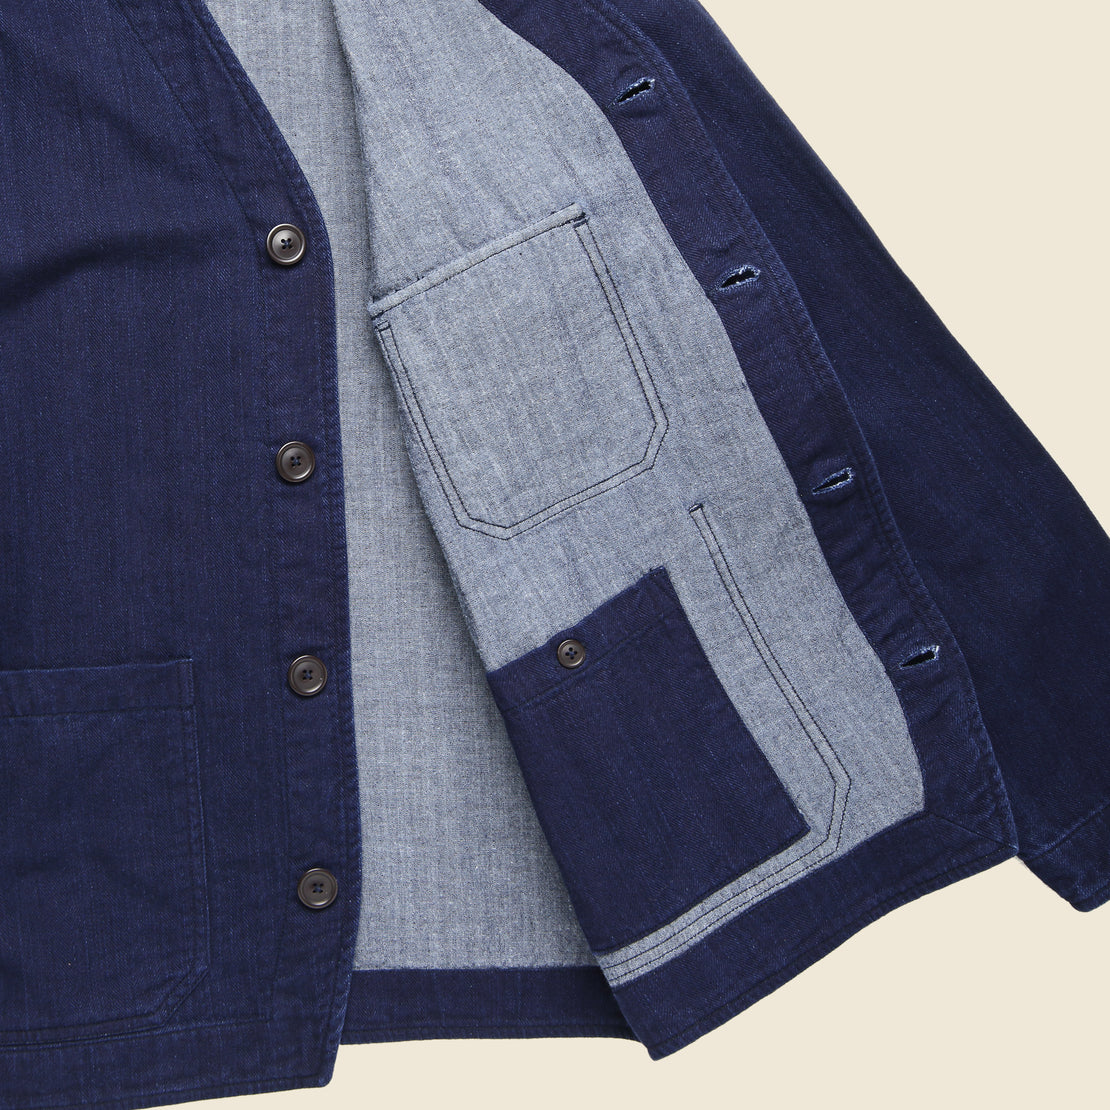 Herringbone Cabin Jacket - Double Denim - Universal Works - STAG Provisions - Tops - L/S Woven - Overshirt